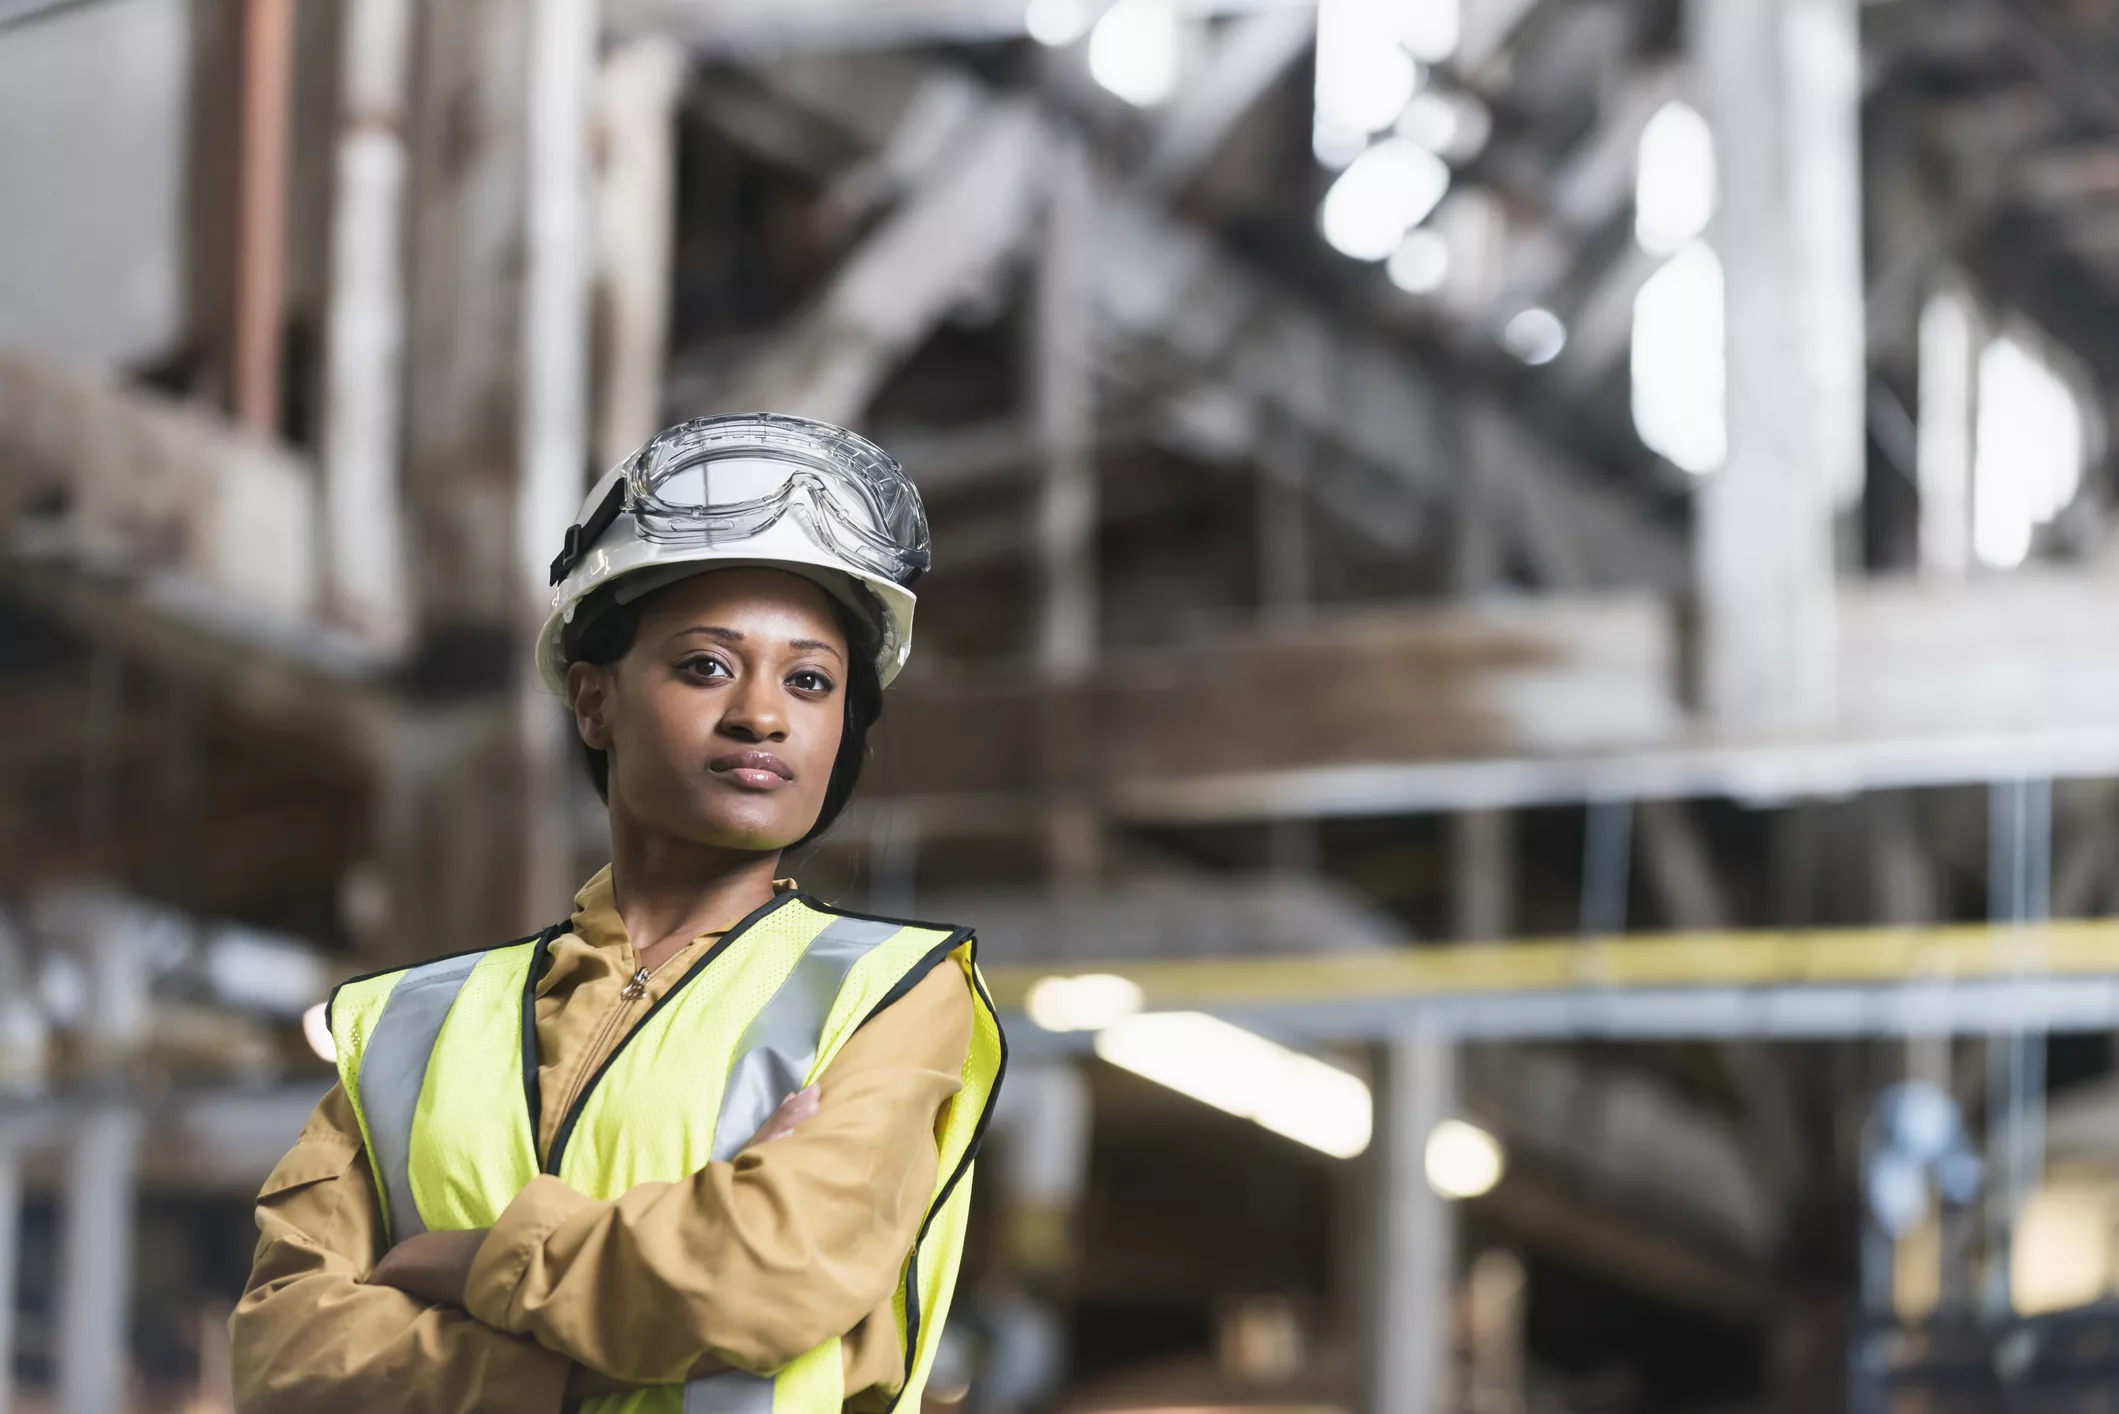 Portrait of a confident, young African American woman working in a manufacturing plant. She is standing with arms folded, looking at the camera, in a storage facility or warehouse. She is wearing a white hardhat and yellow safety vest.